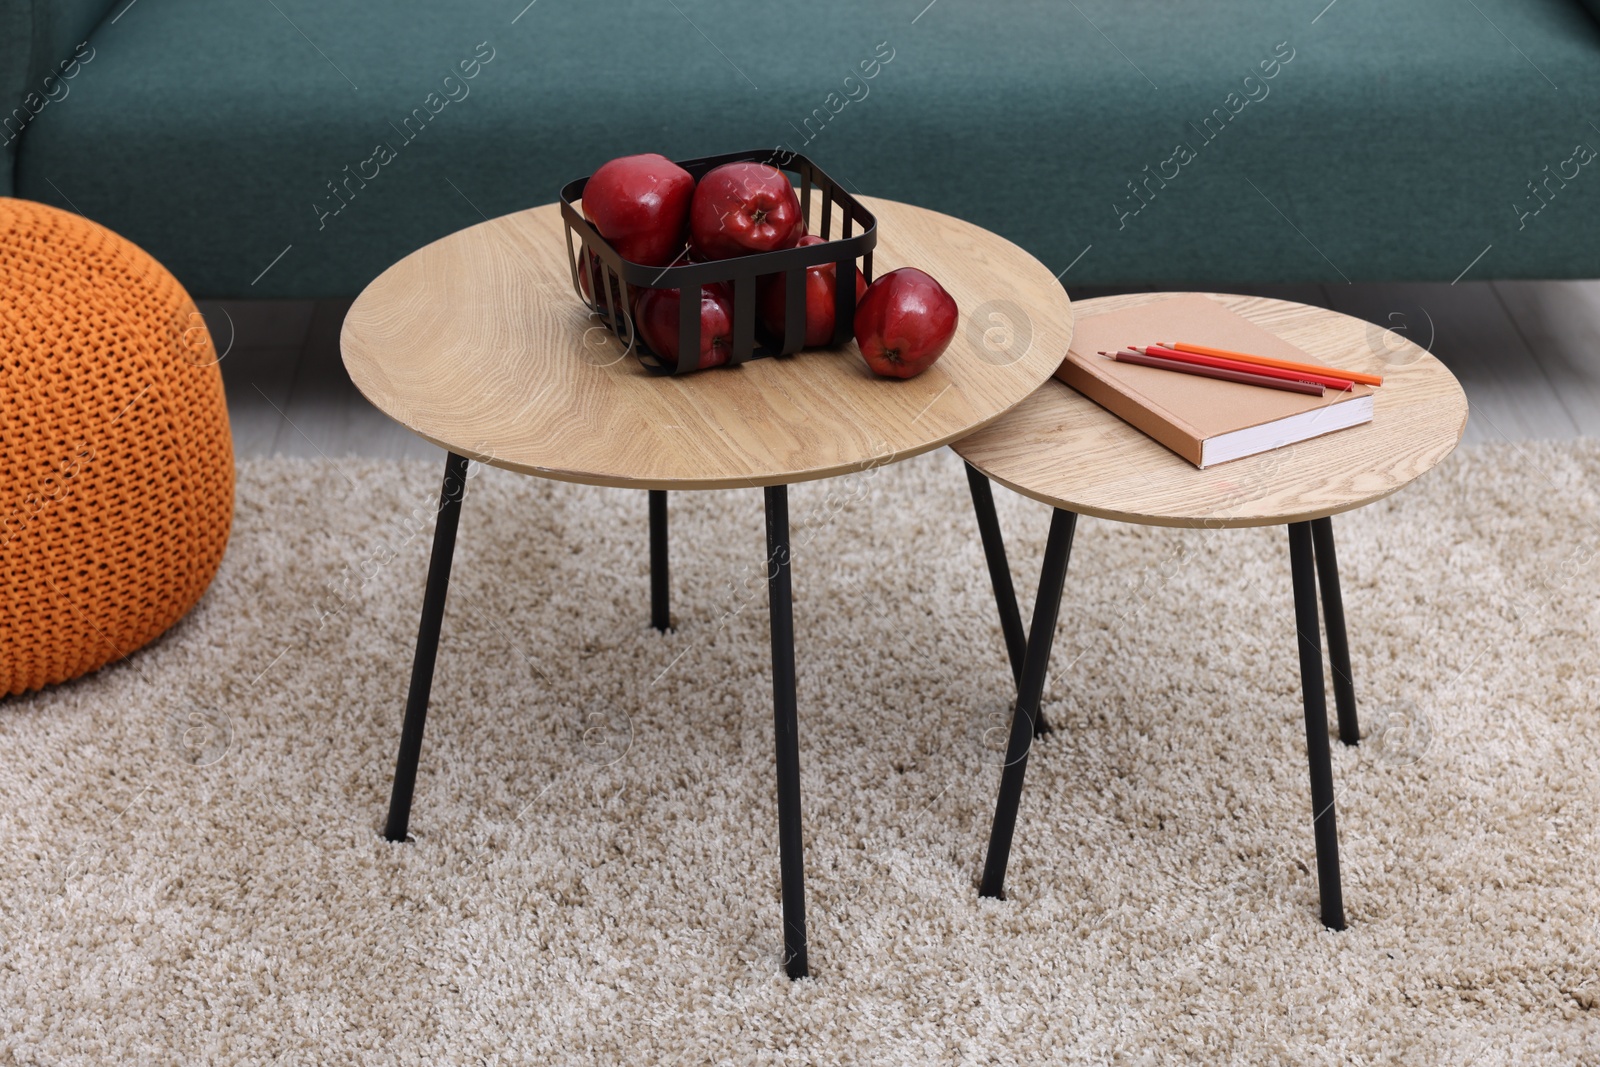 Photo of Red apples, book and pencils on nesting tables indoors